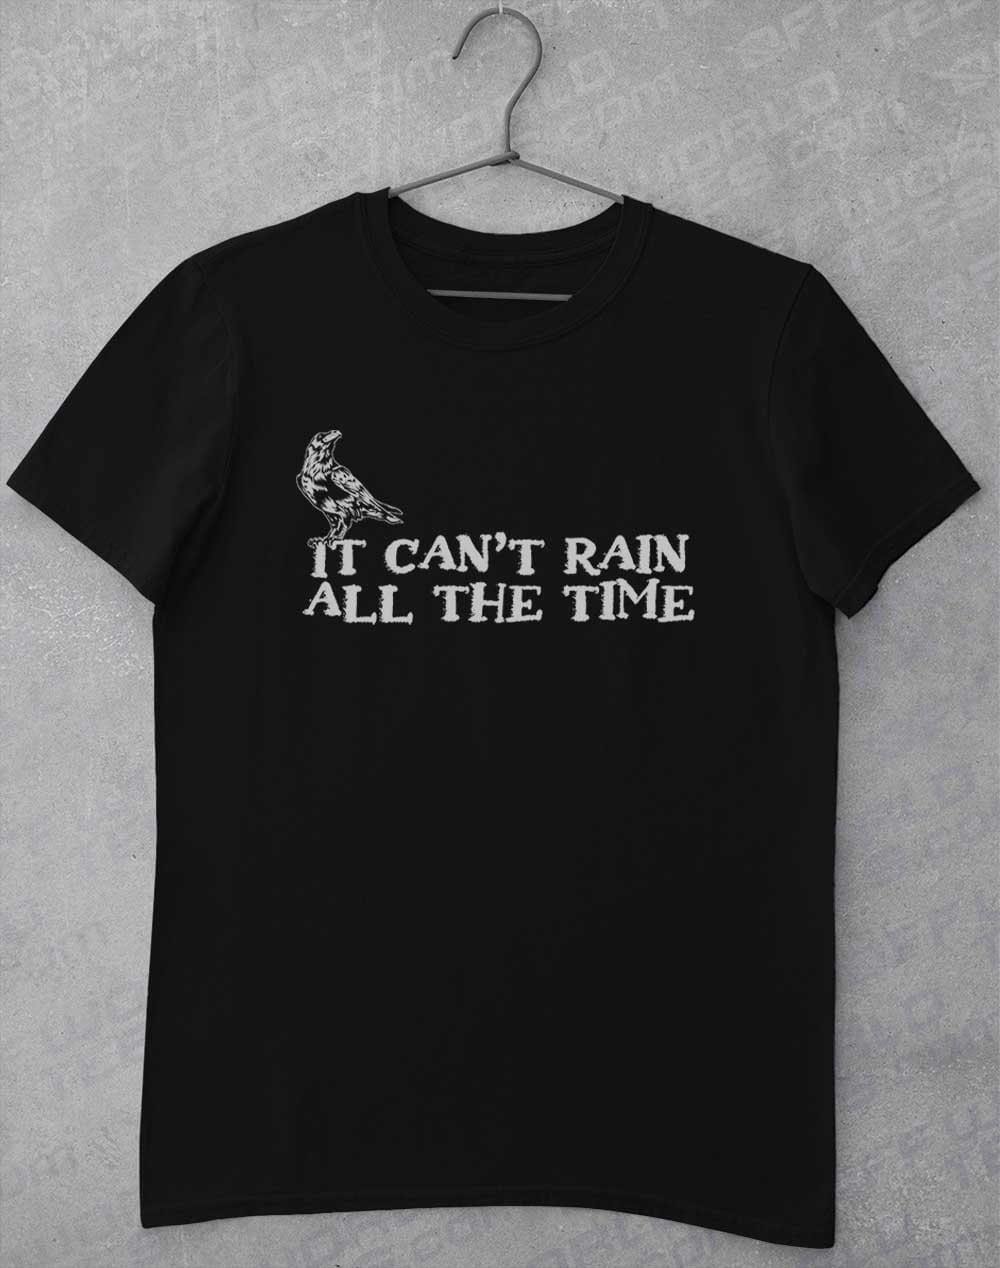 It Can't Rain All the Time T-Shirt S / Black  - Off World Tees